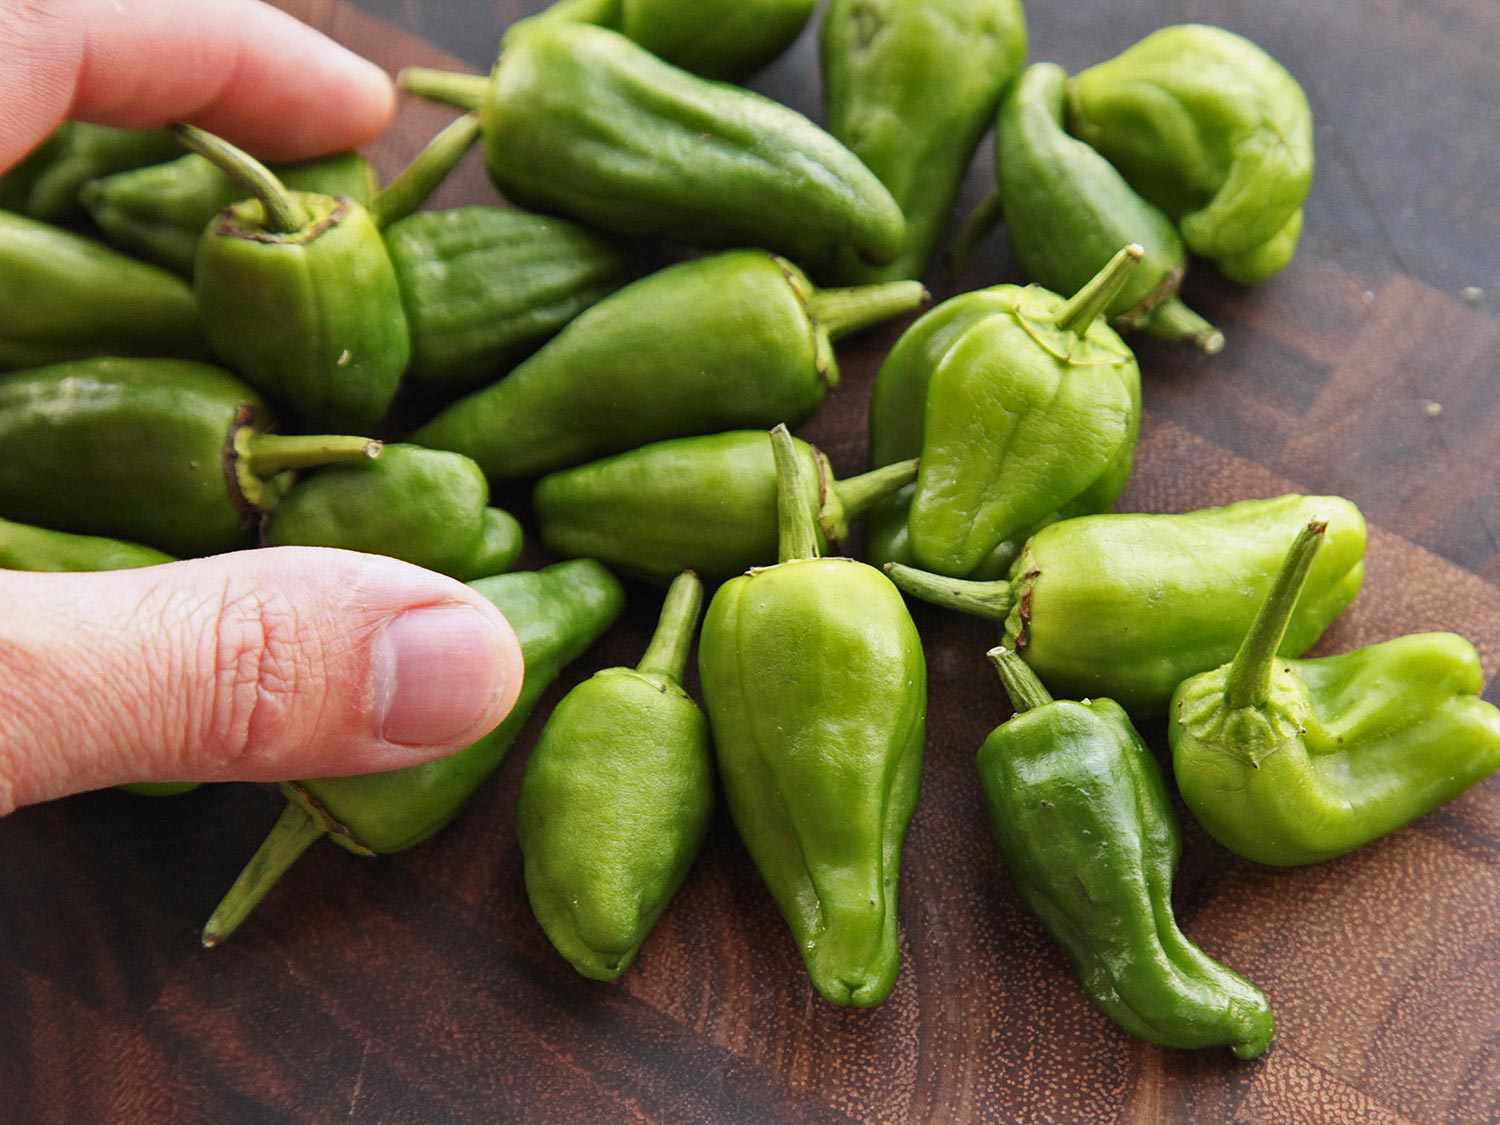 A hand picking up a fresh Padrón pepper.